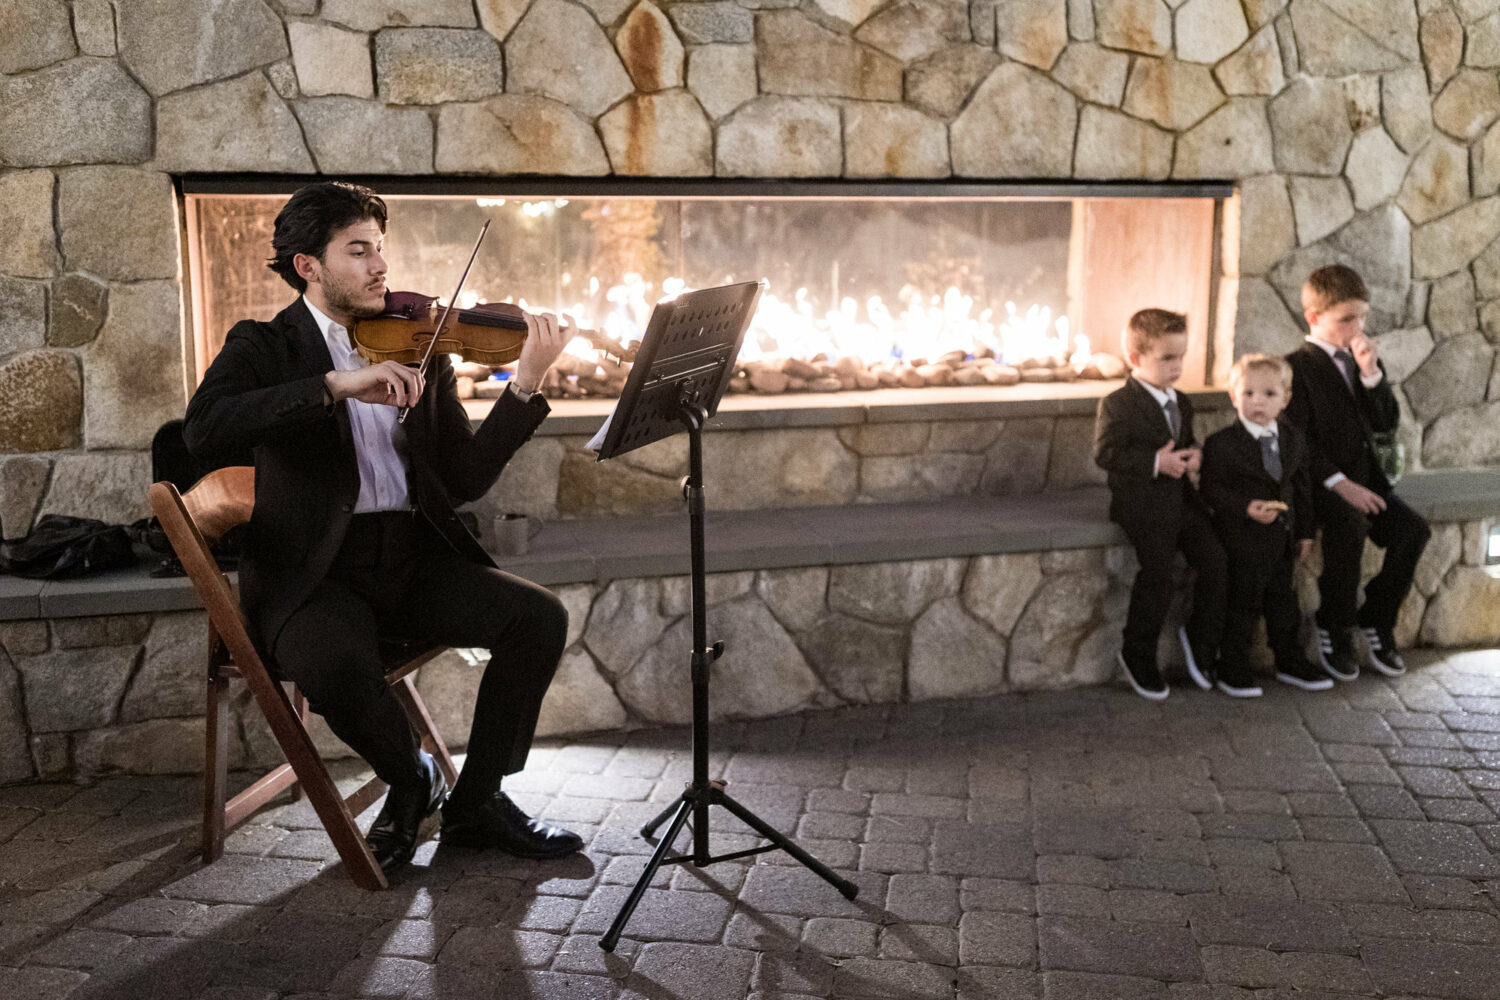 A violinist performs in front of an outdoor fireplace.